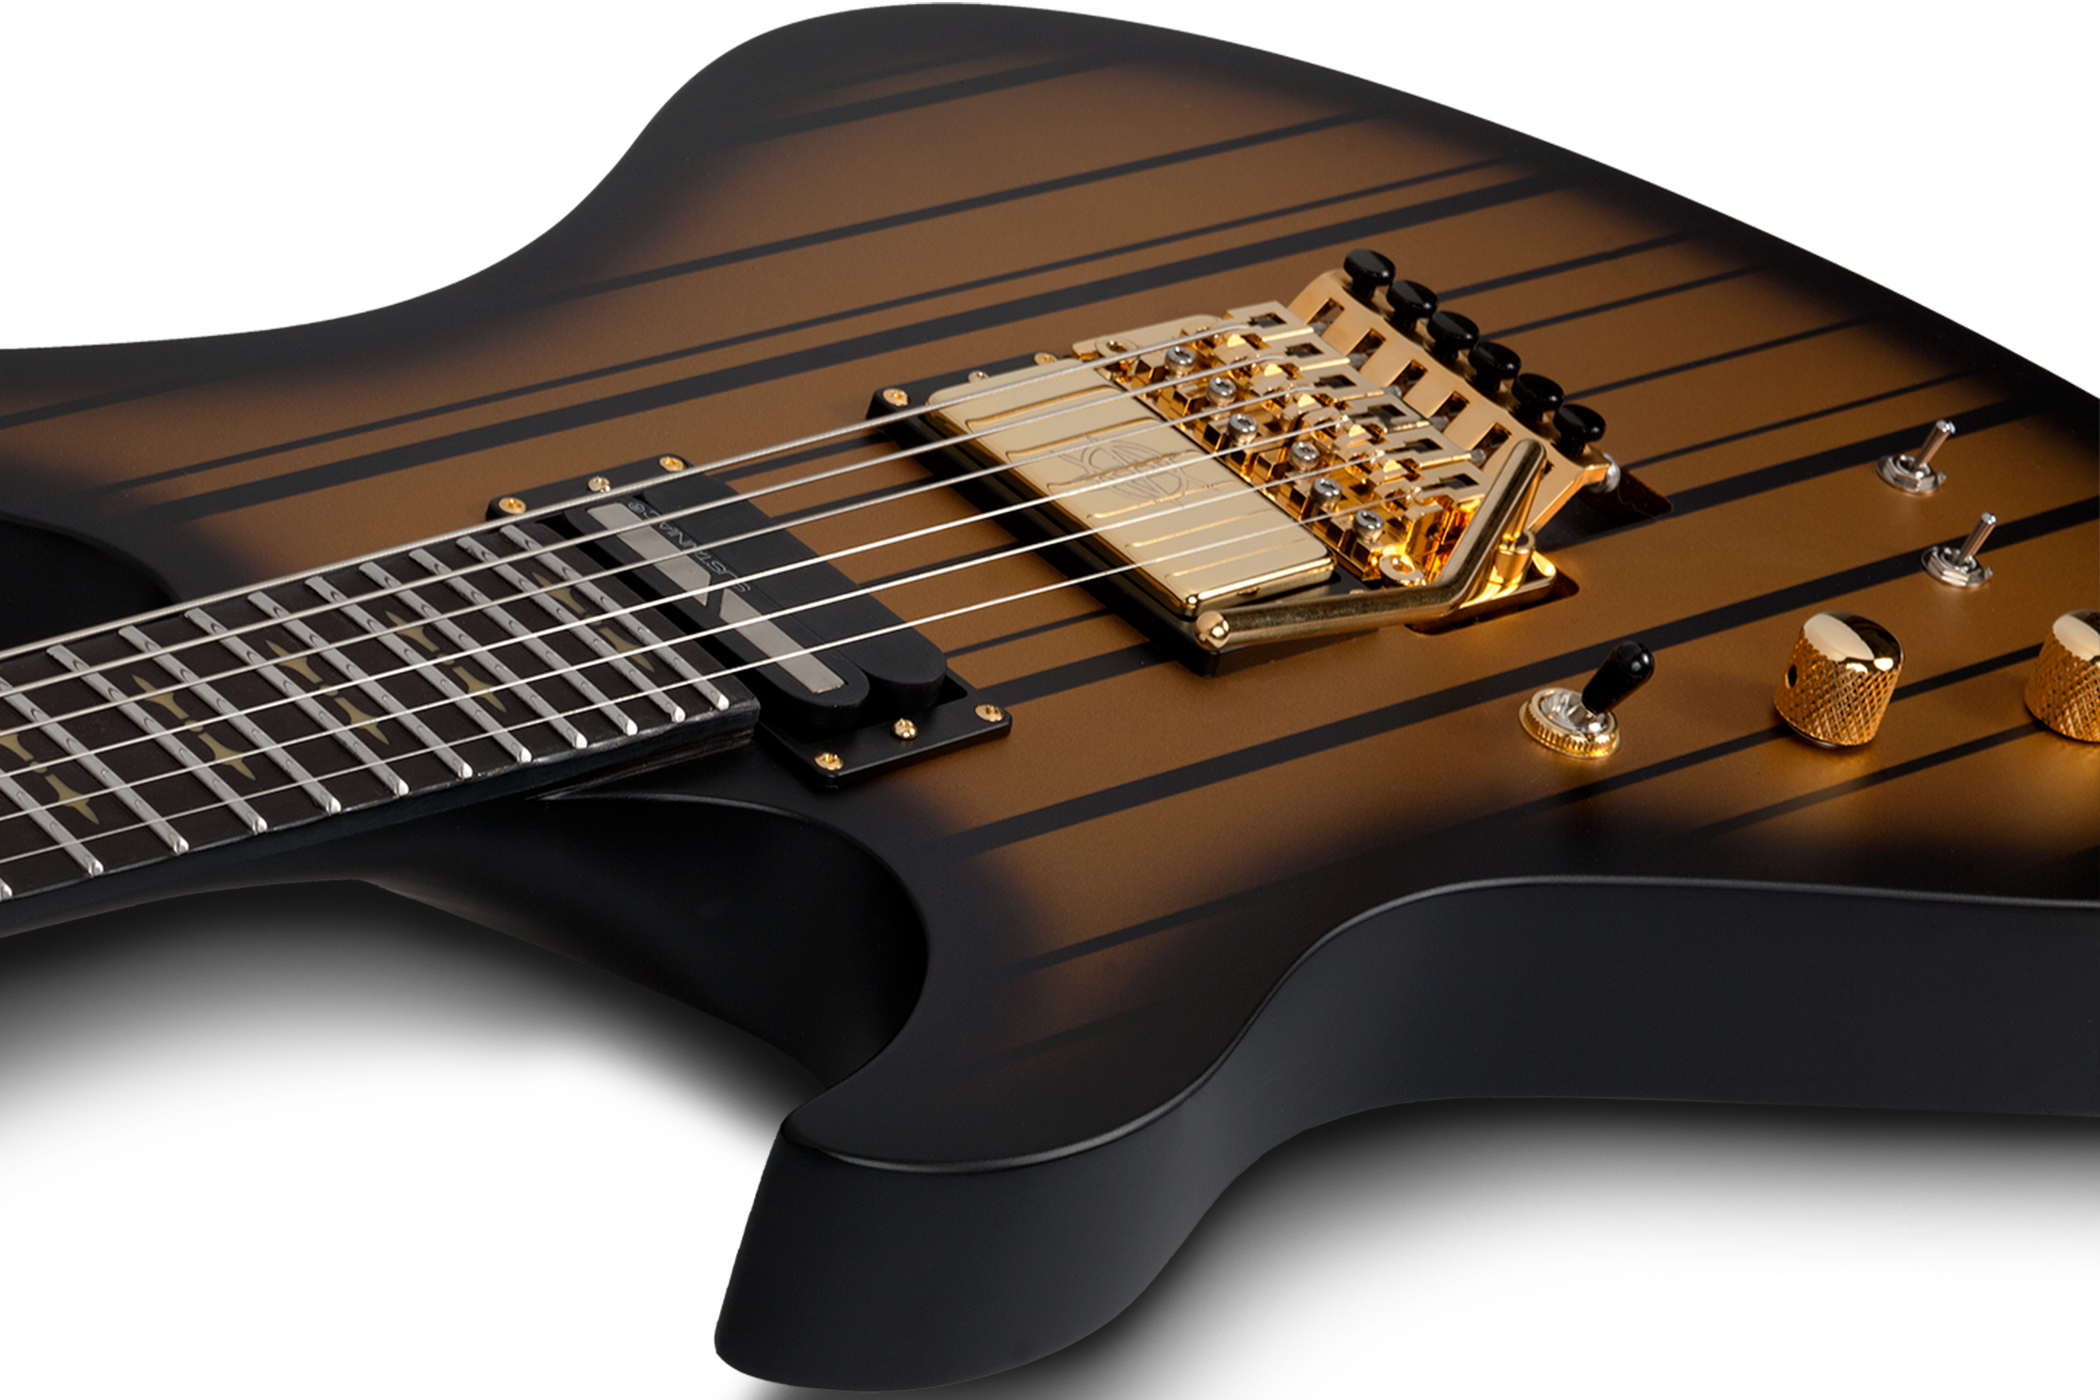 Schecter Synyster Custom-s Lh Signature Gaucher 2h Sustainiac Fr Eb - Satin Gold Burst - Left-handed electric guitar - Variation 3